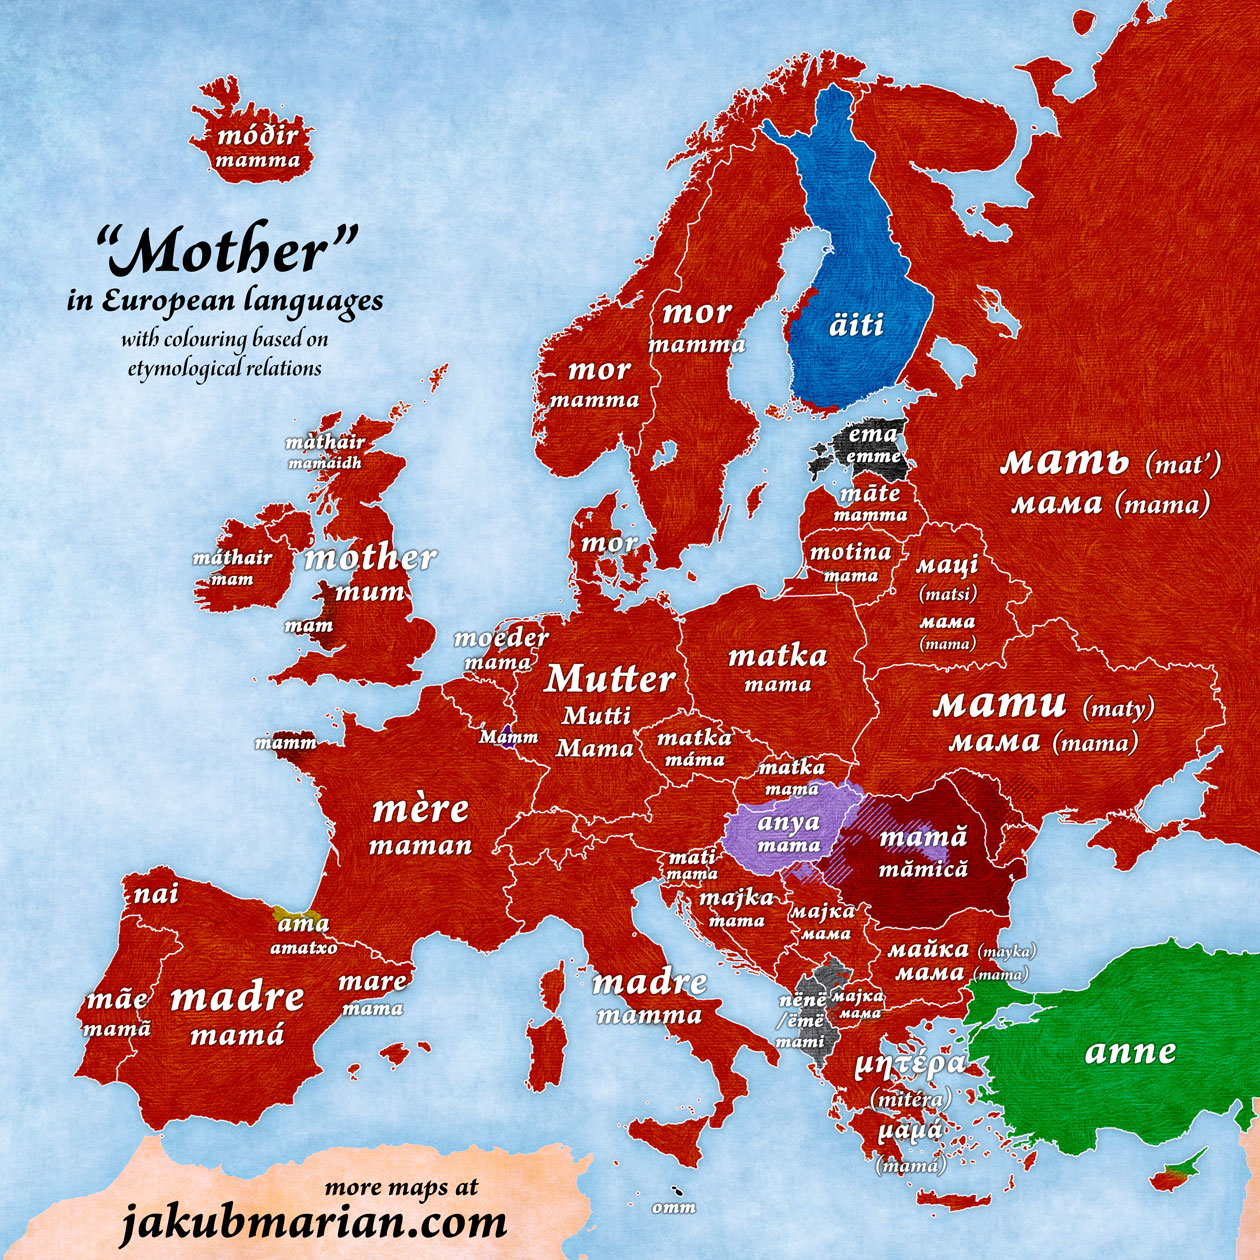 ‘Mother’ in European languages (map)